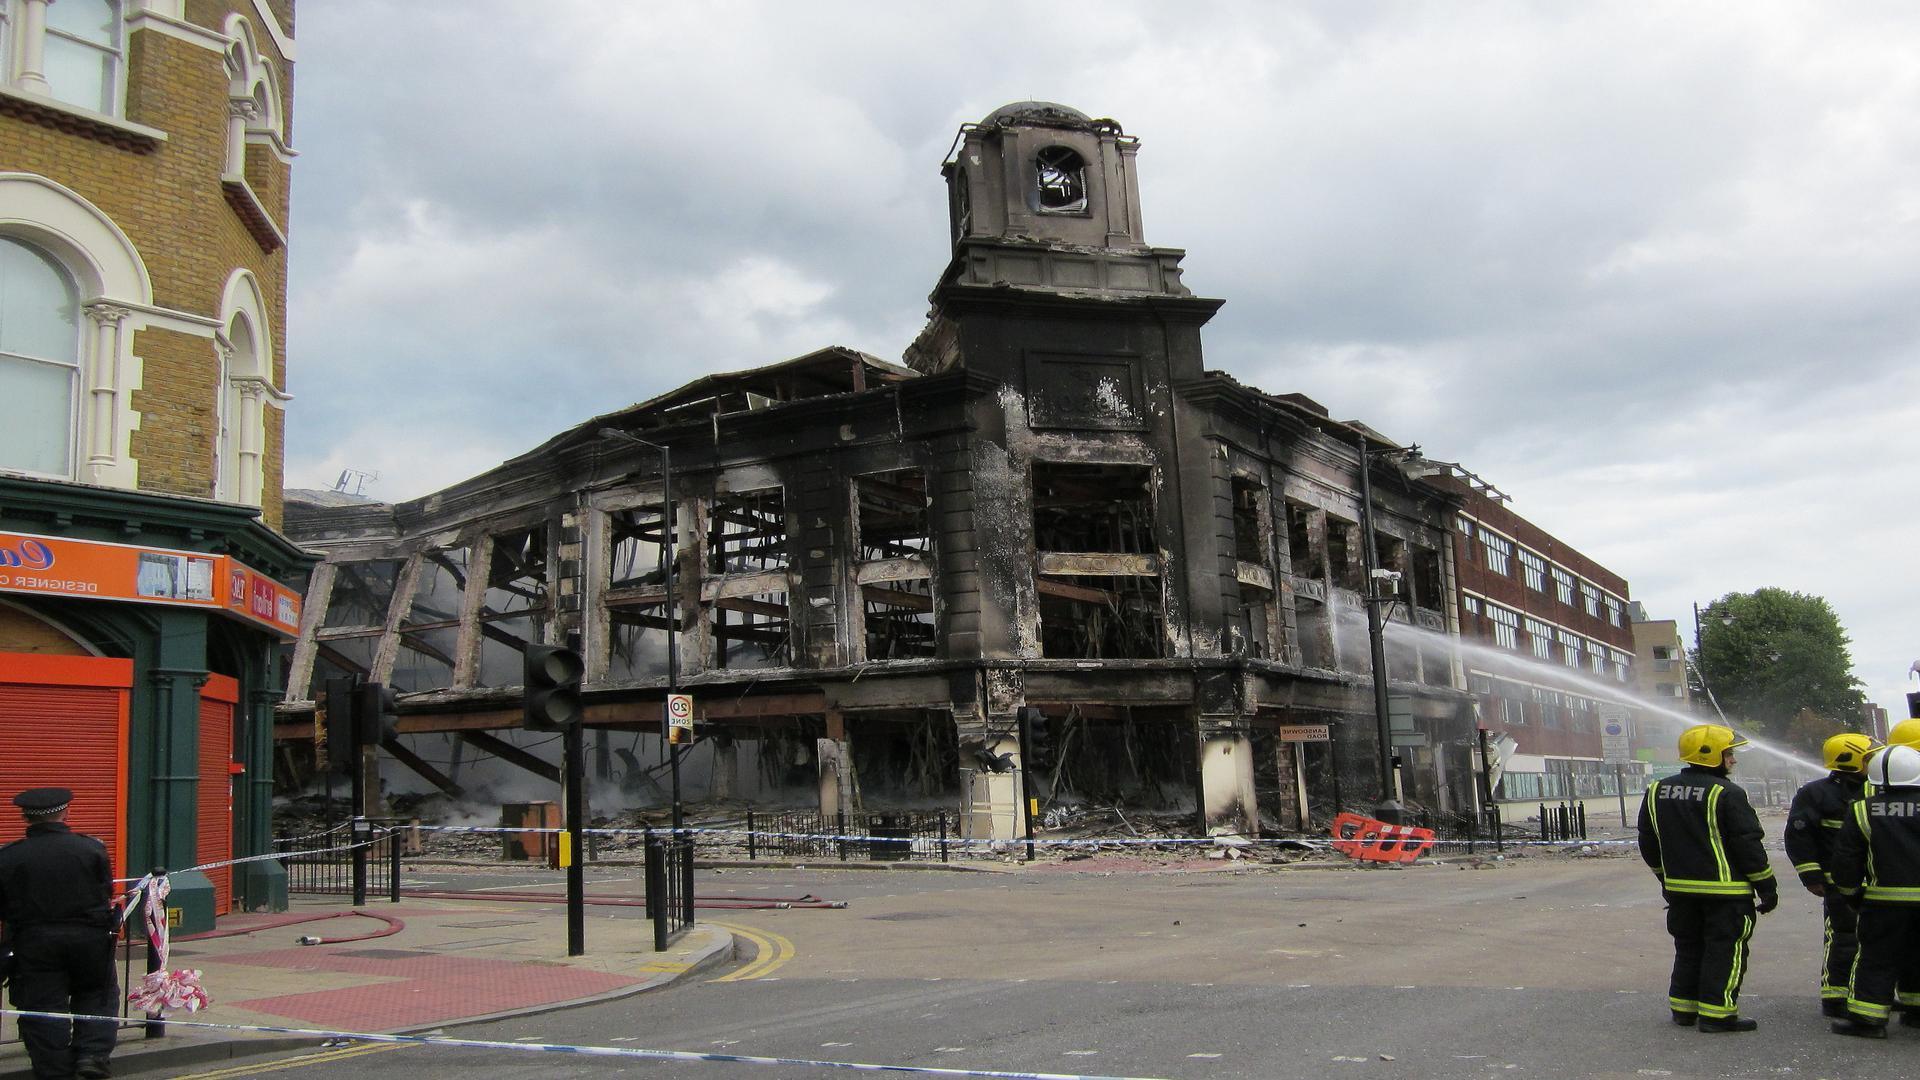 The England Riots Information